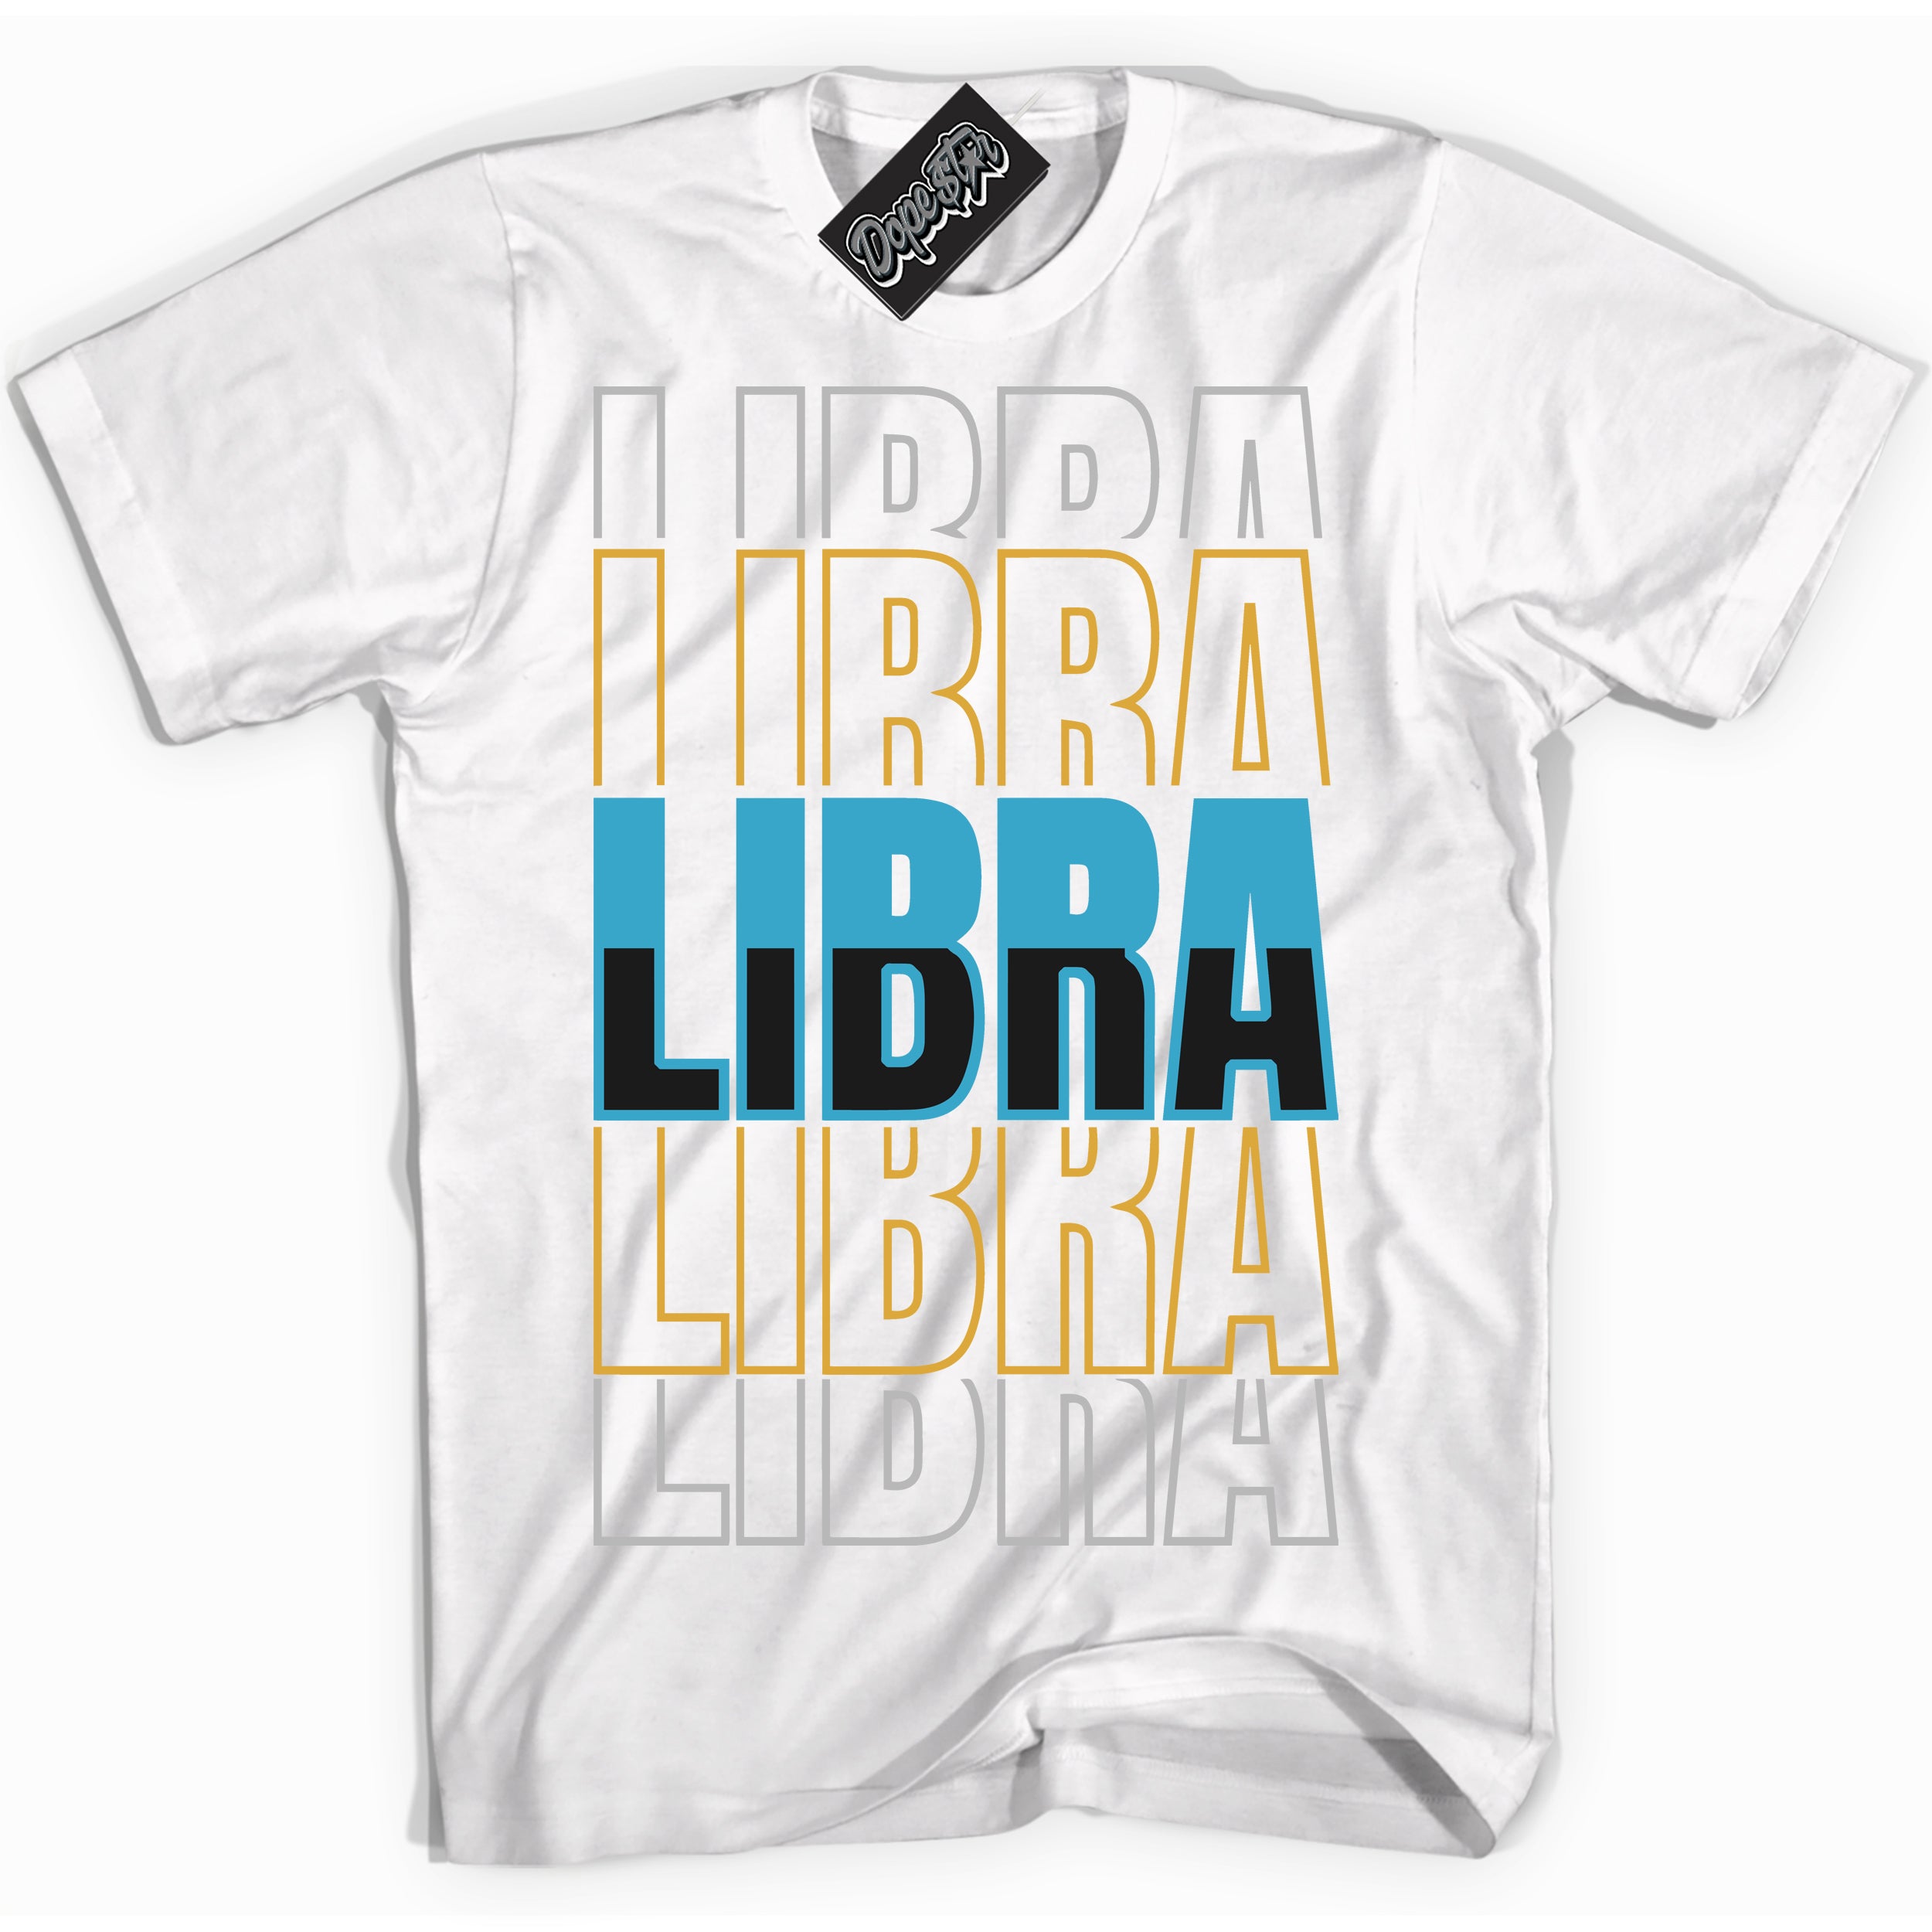 Cool White Shirt with “ Libra” design that perfectly matches Aqua 5s Sneakers.